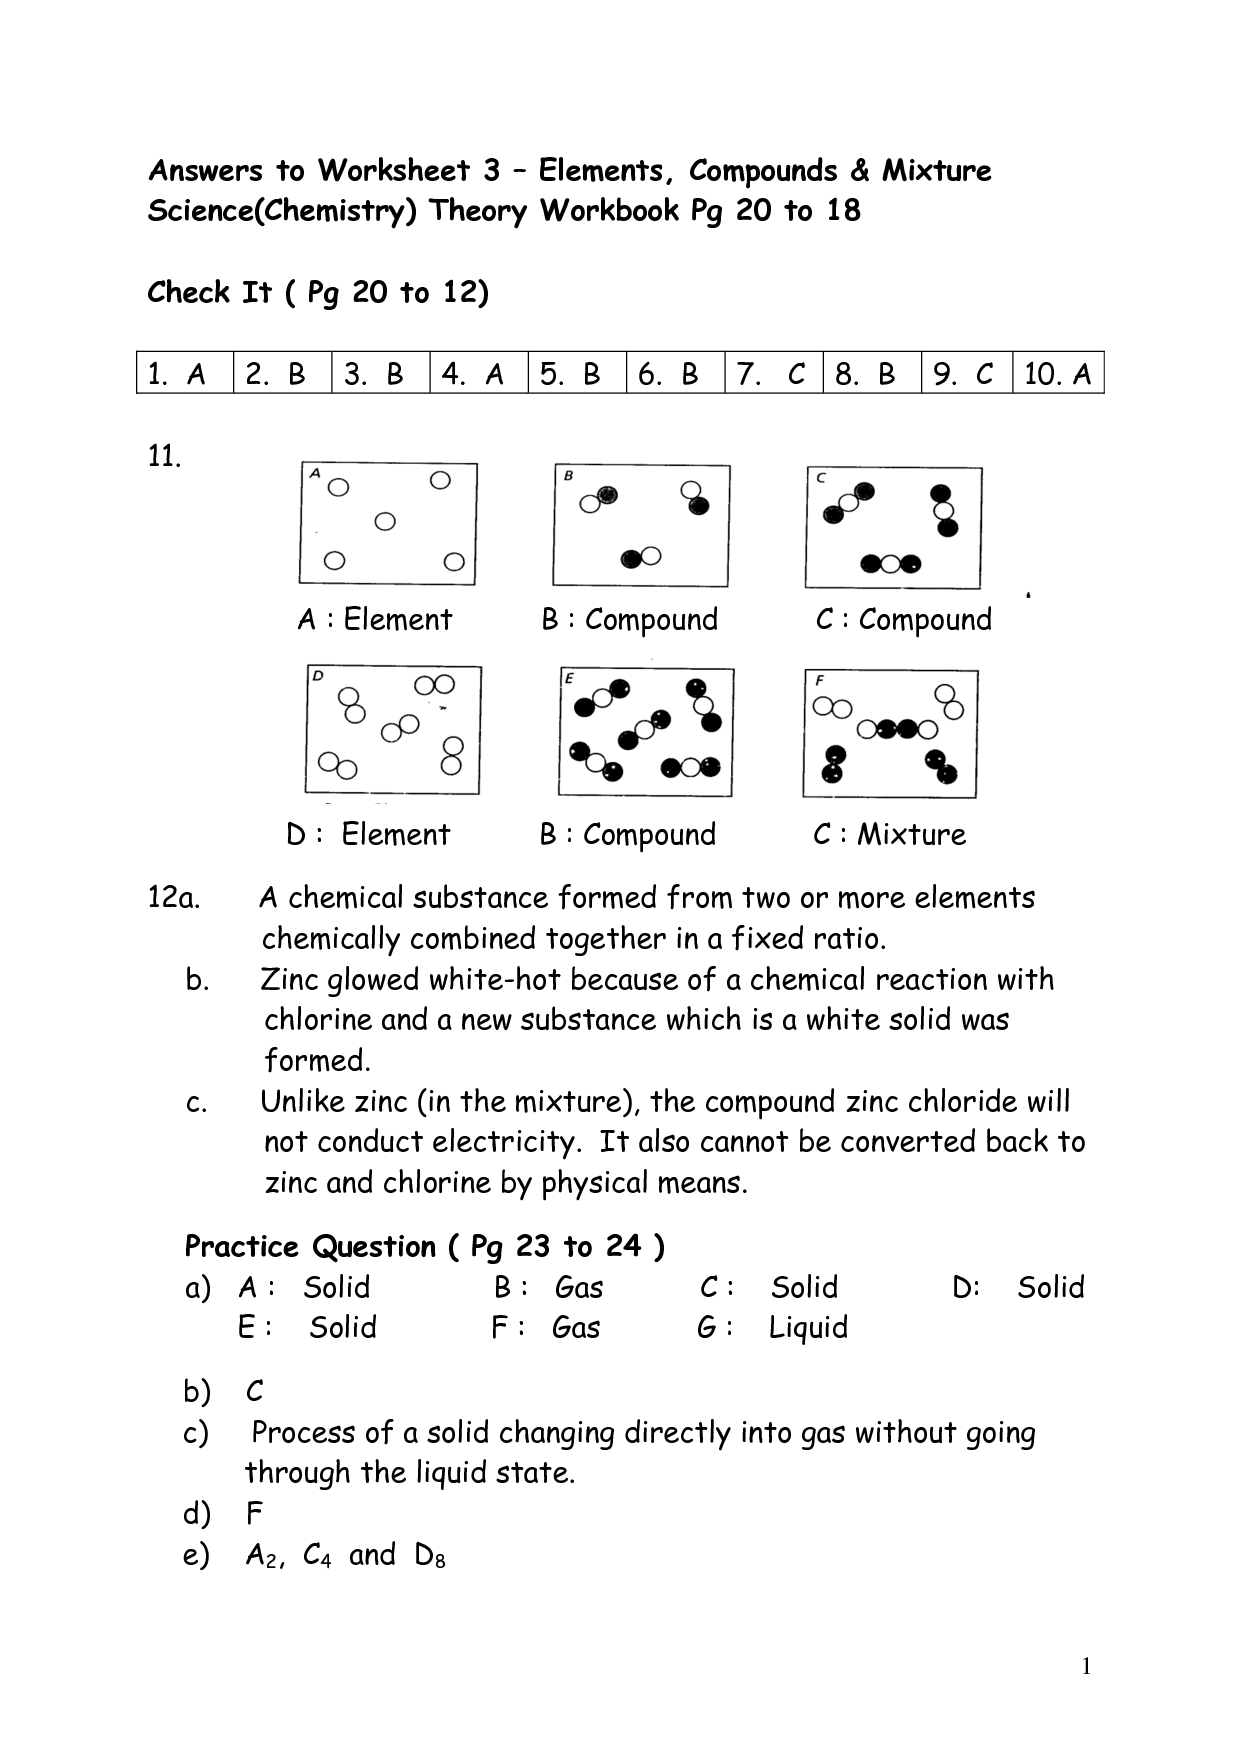 17-best-images-of-elements-compounds-and-mixtures-worksheet-answer-key